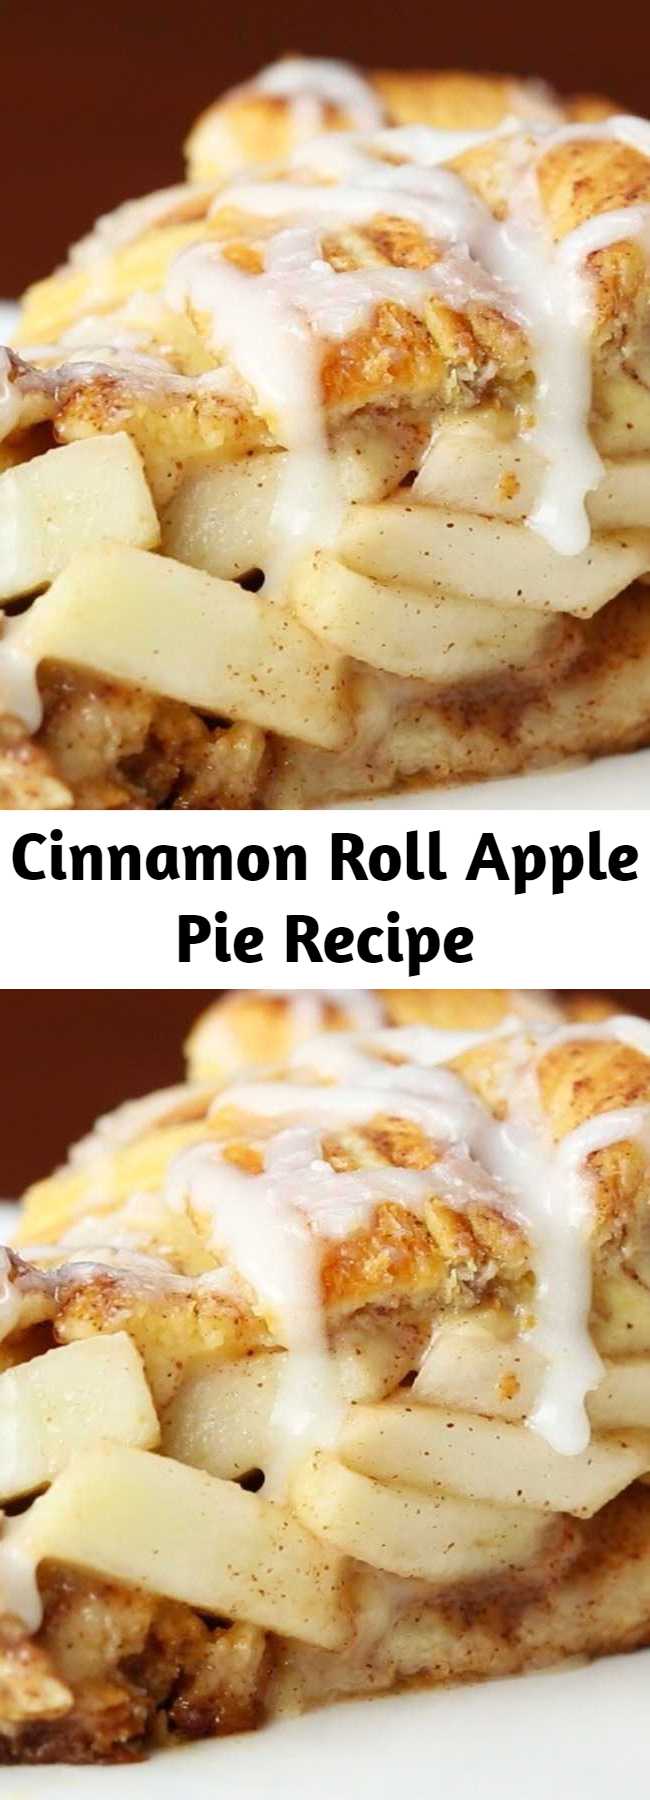 Cinnamon Roll Apple Pie Recipe - Cinnamon rolls and apple pie all in one? It's almost too good to be true! This amazing dessert only has 5 ingredients and is perfect to make for Thanksgiving, a holiday party, or even just to enjoy the fall weather.